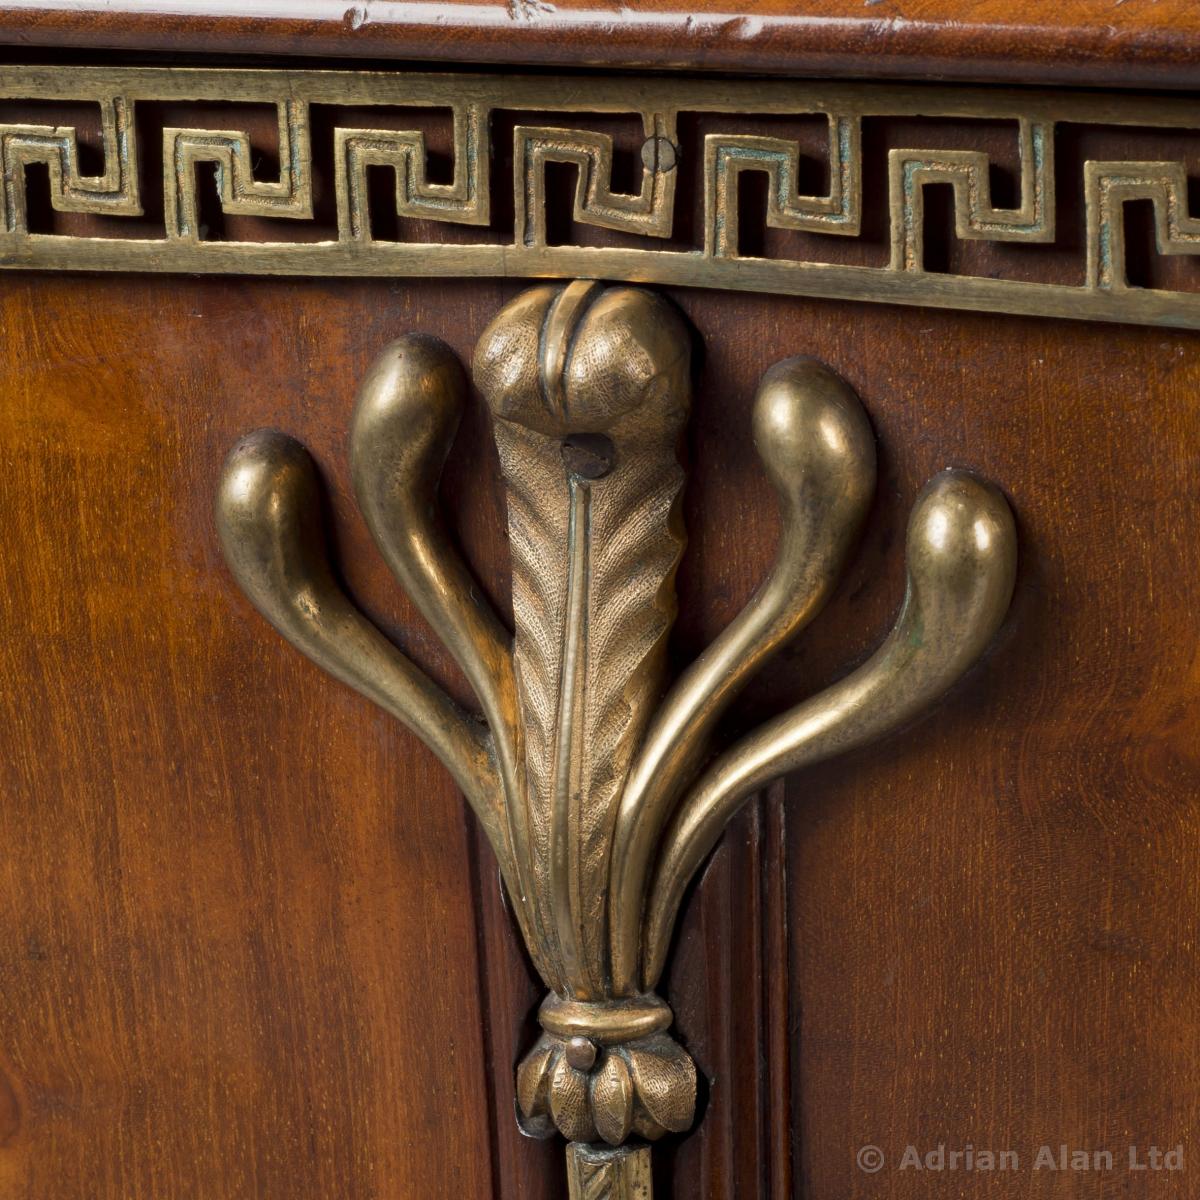 A detail of a Rare Pair of Late George III Gilt-Bronze Mounted Mahogany Cellarettes